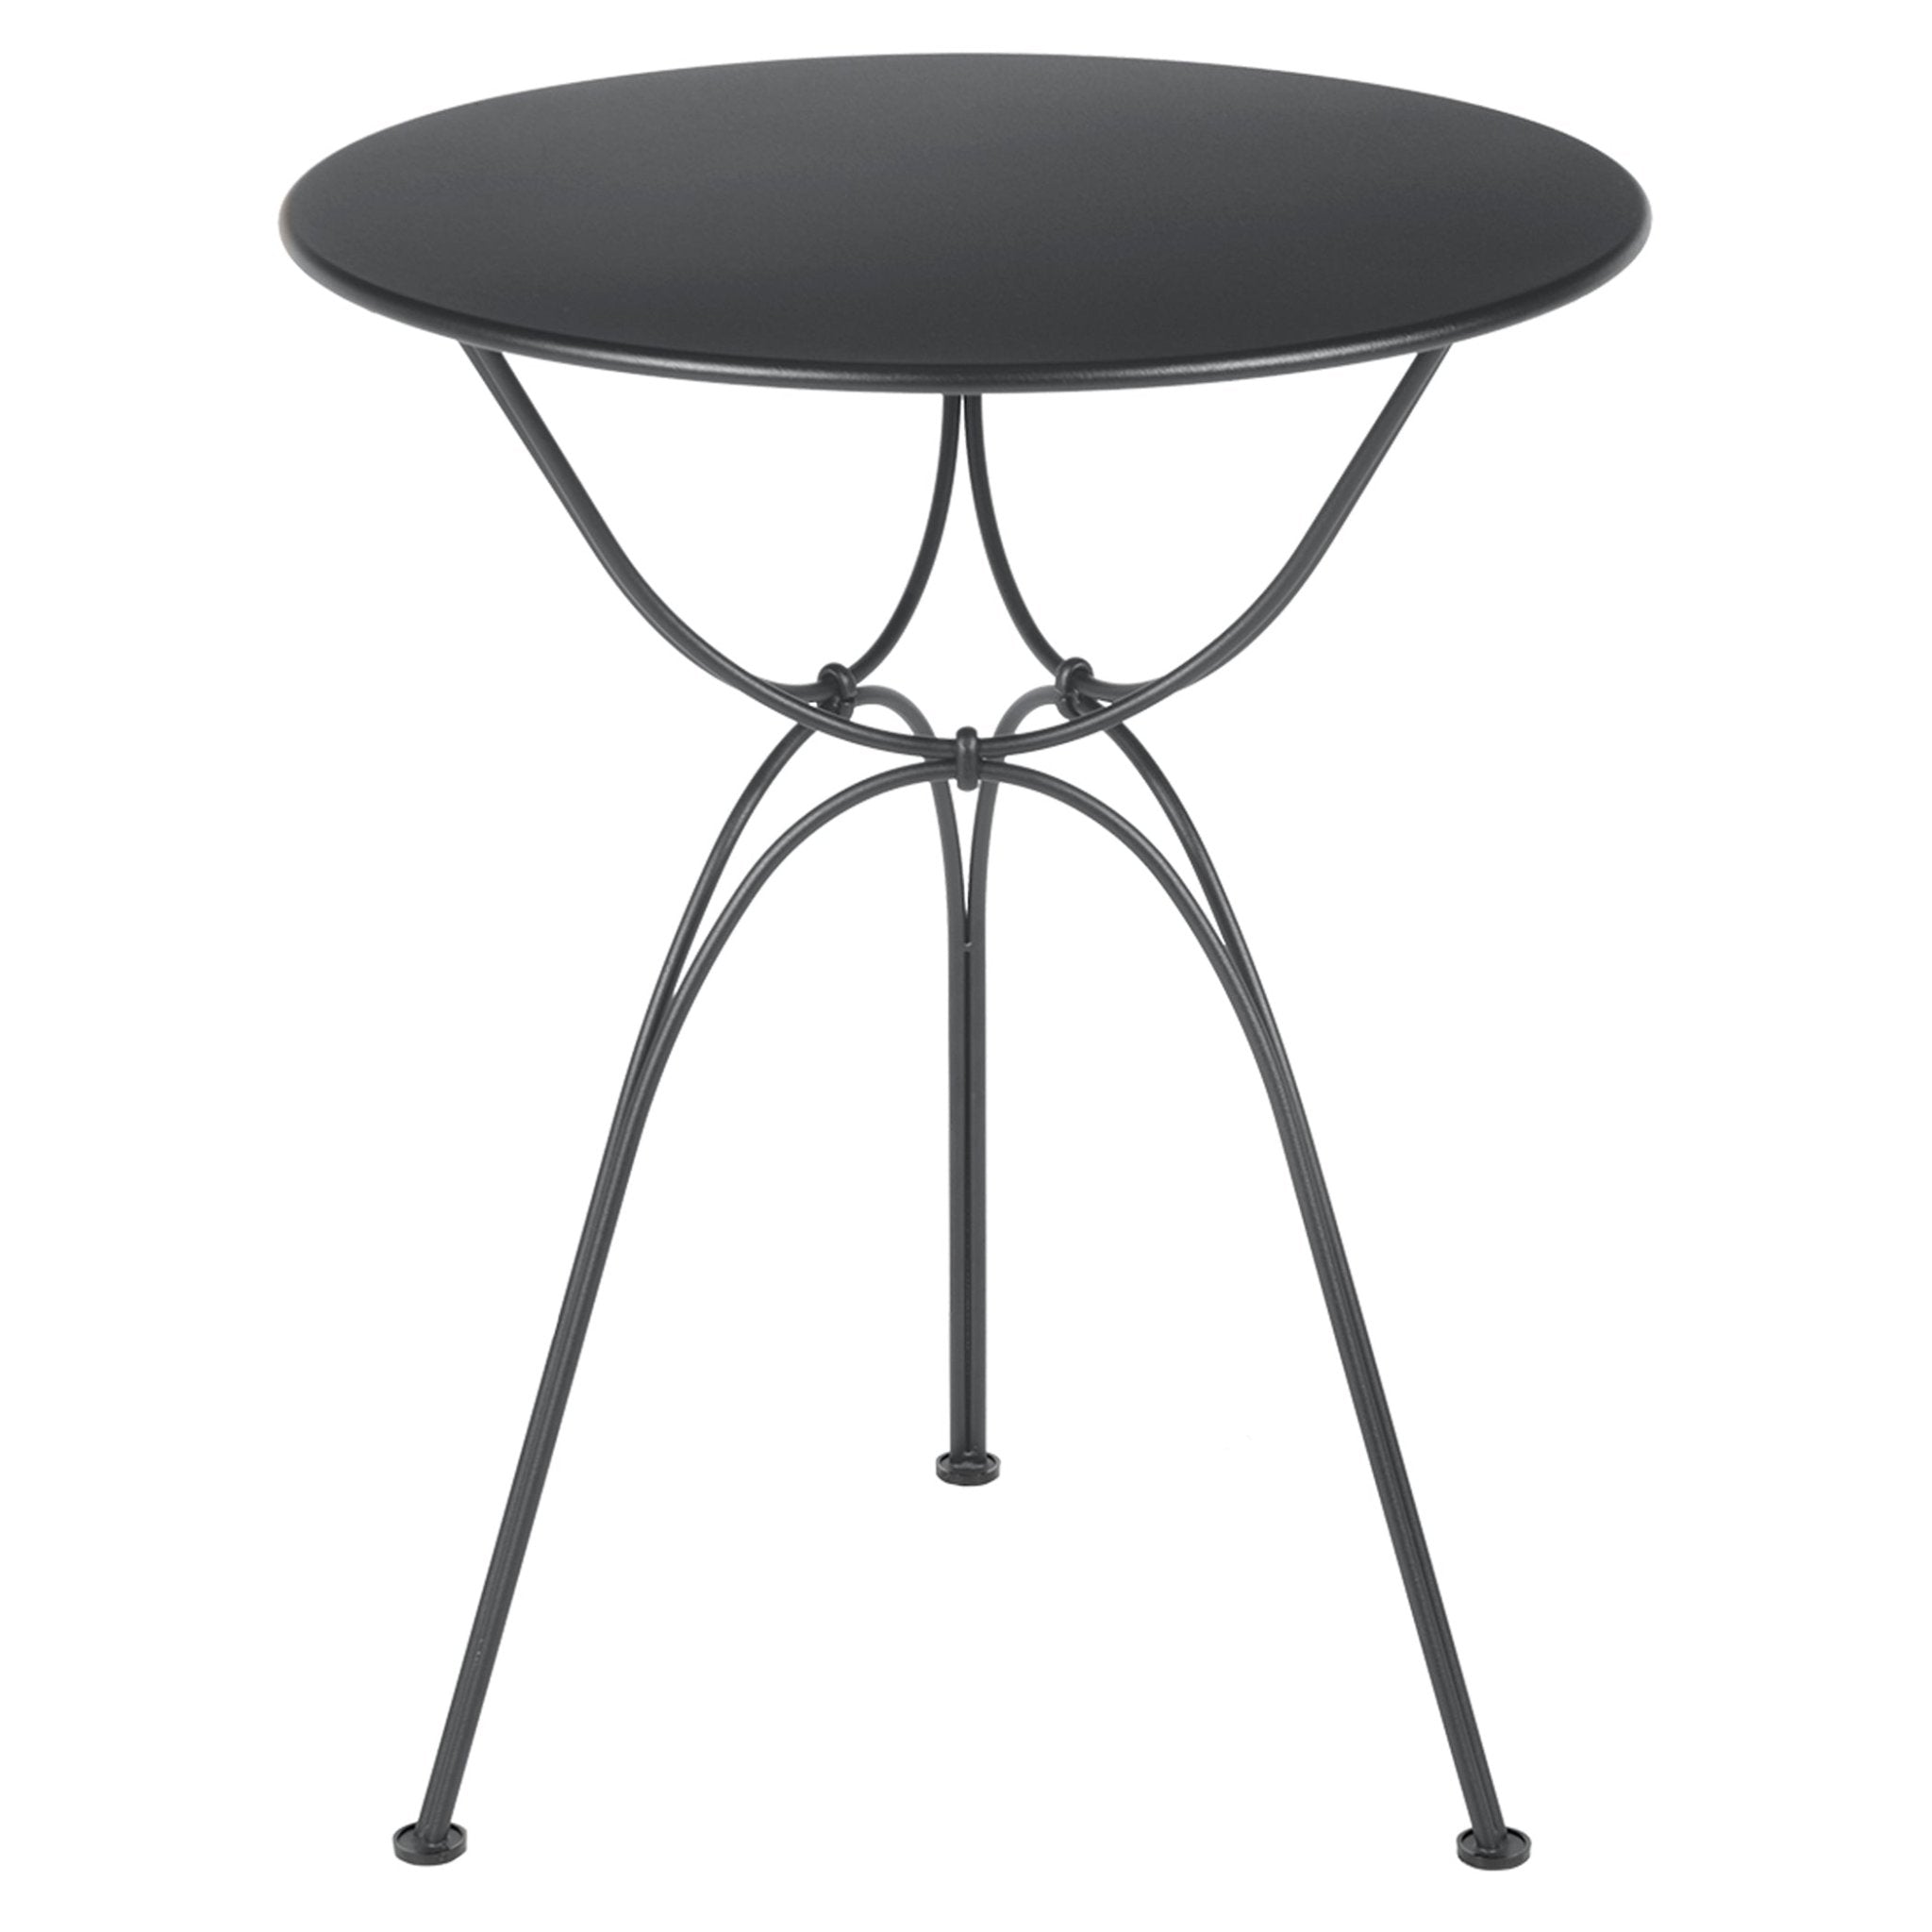 Airloop Round Table 24" - Anthracite